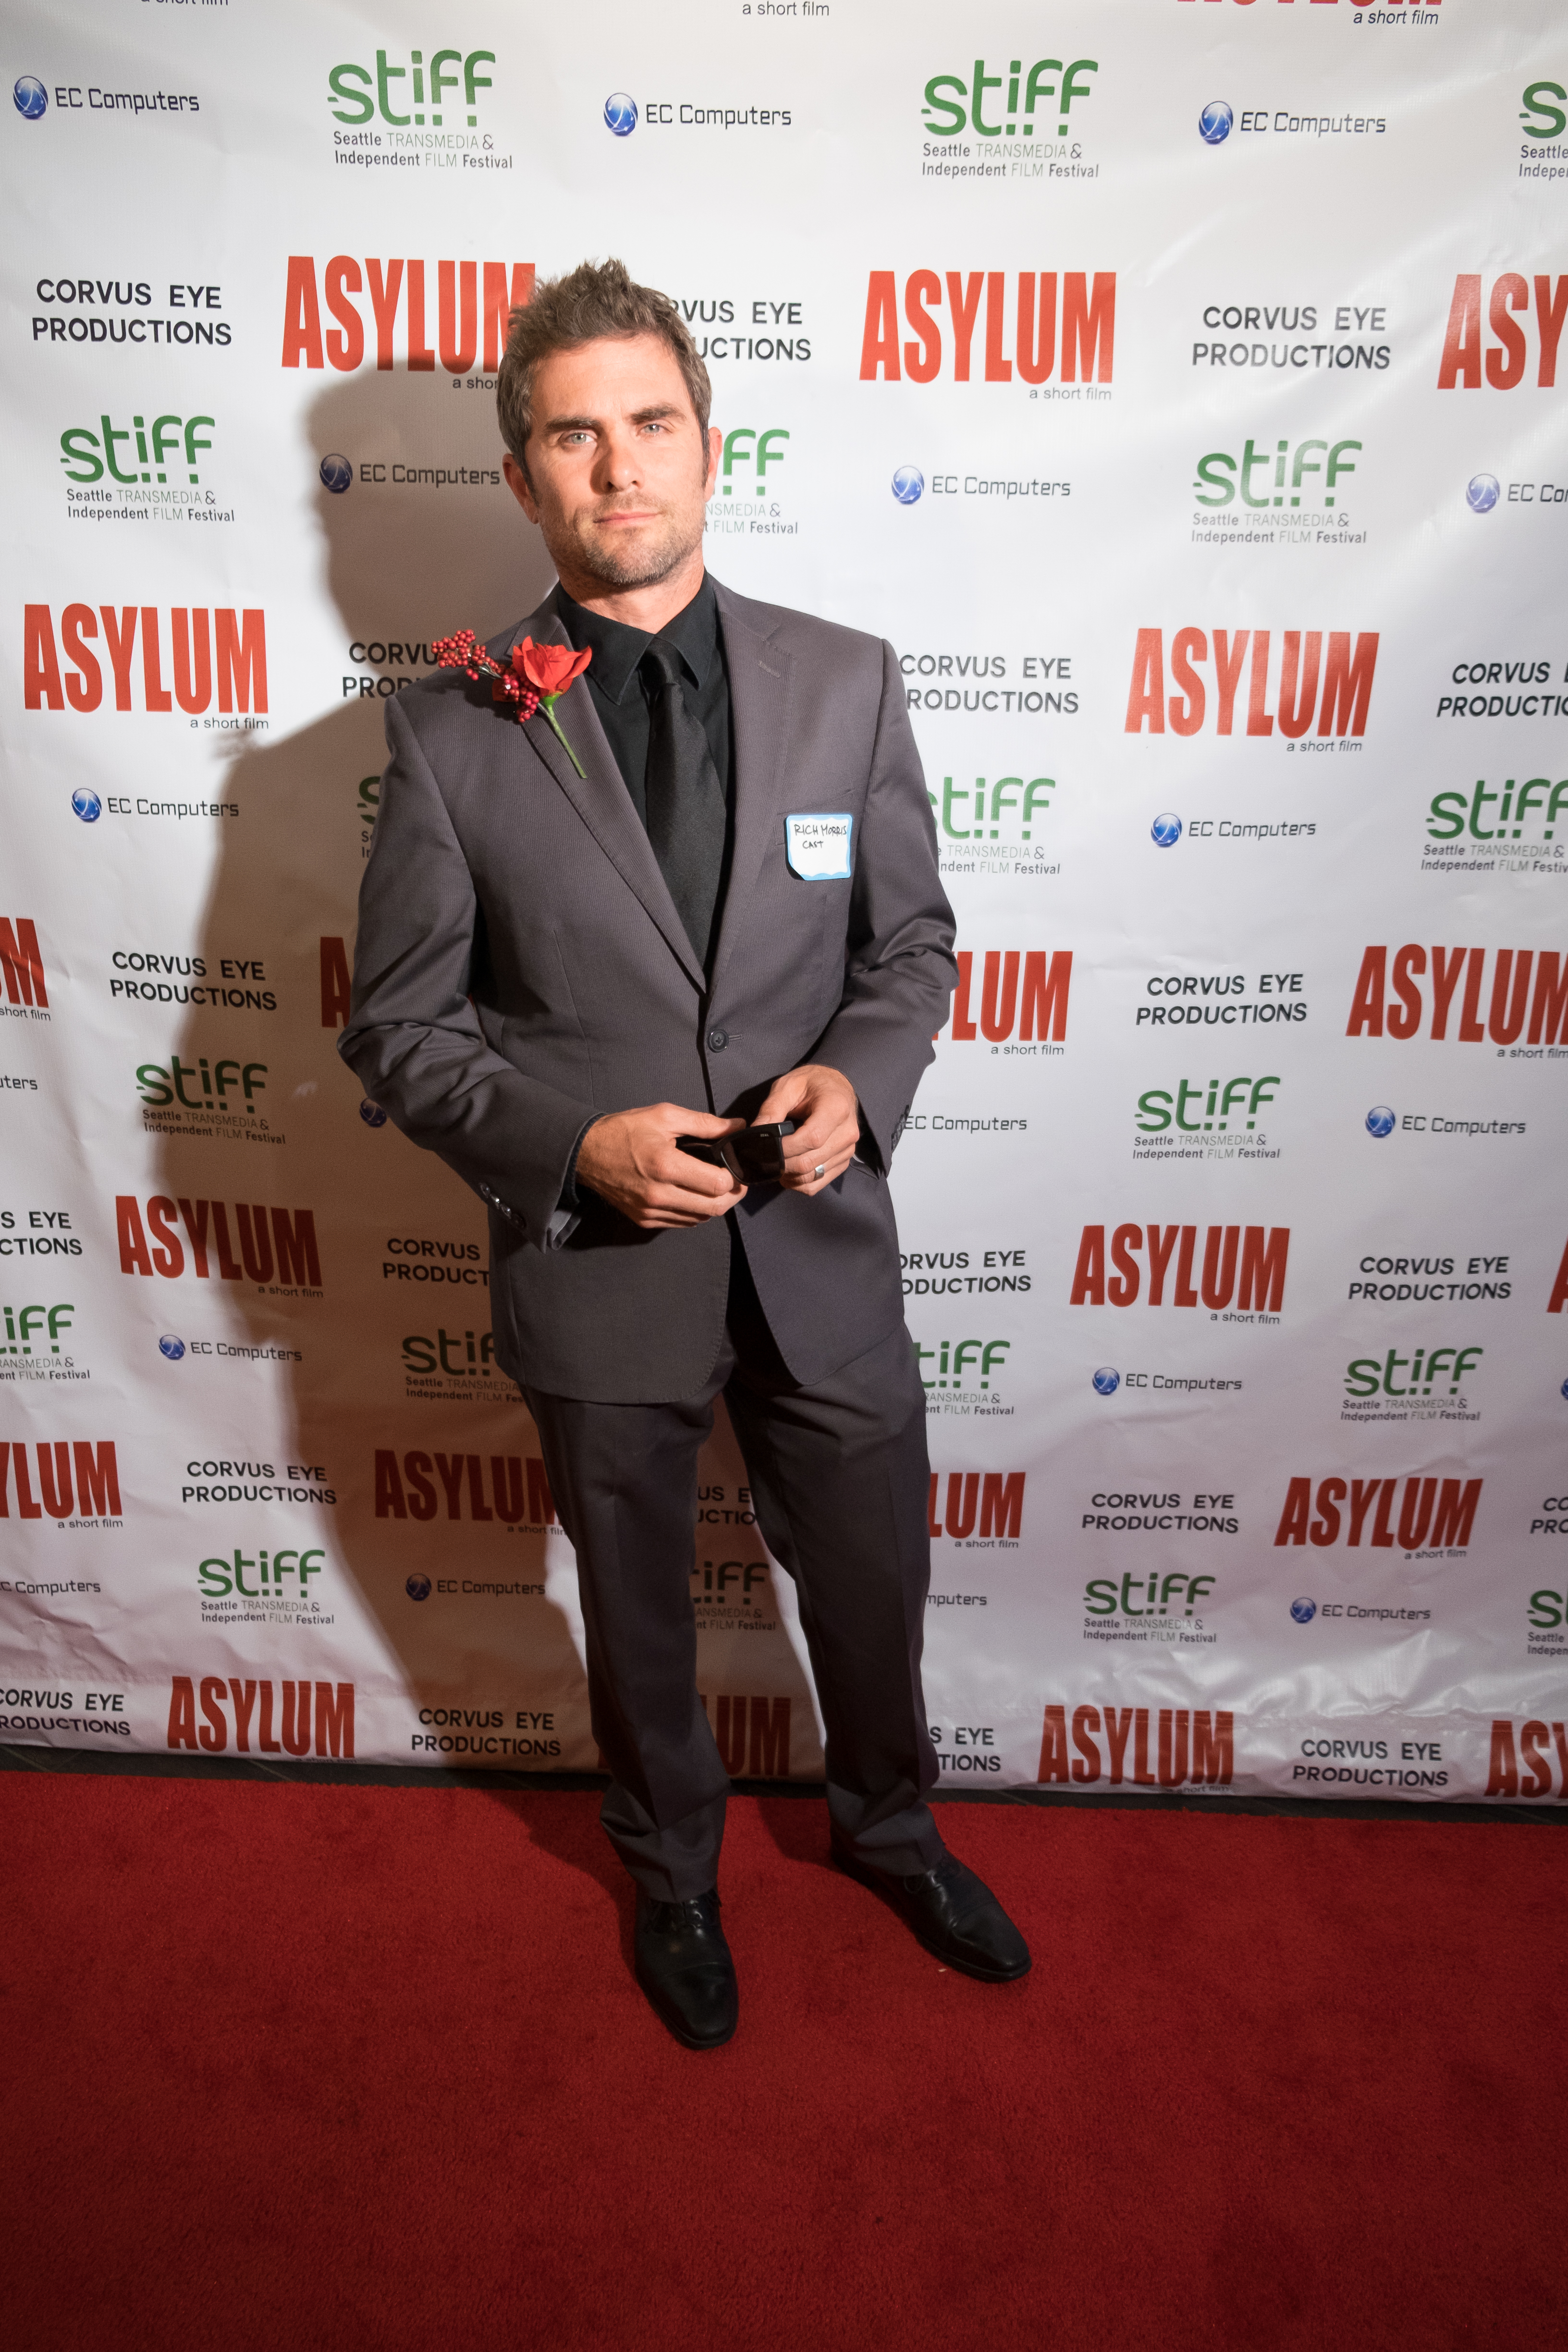 At Columbia Tower Club fundraising event for Asylum: A Short Flim